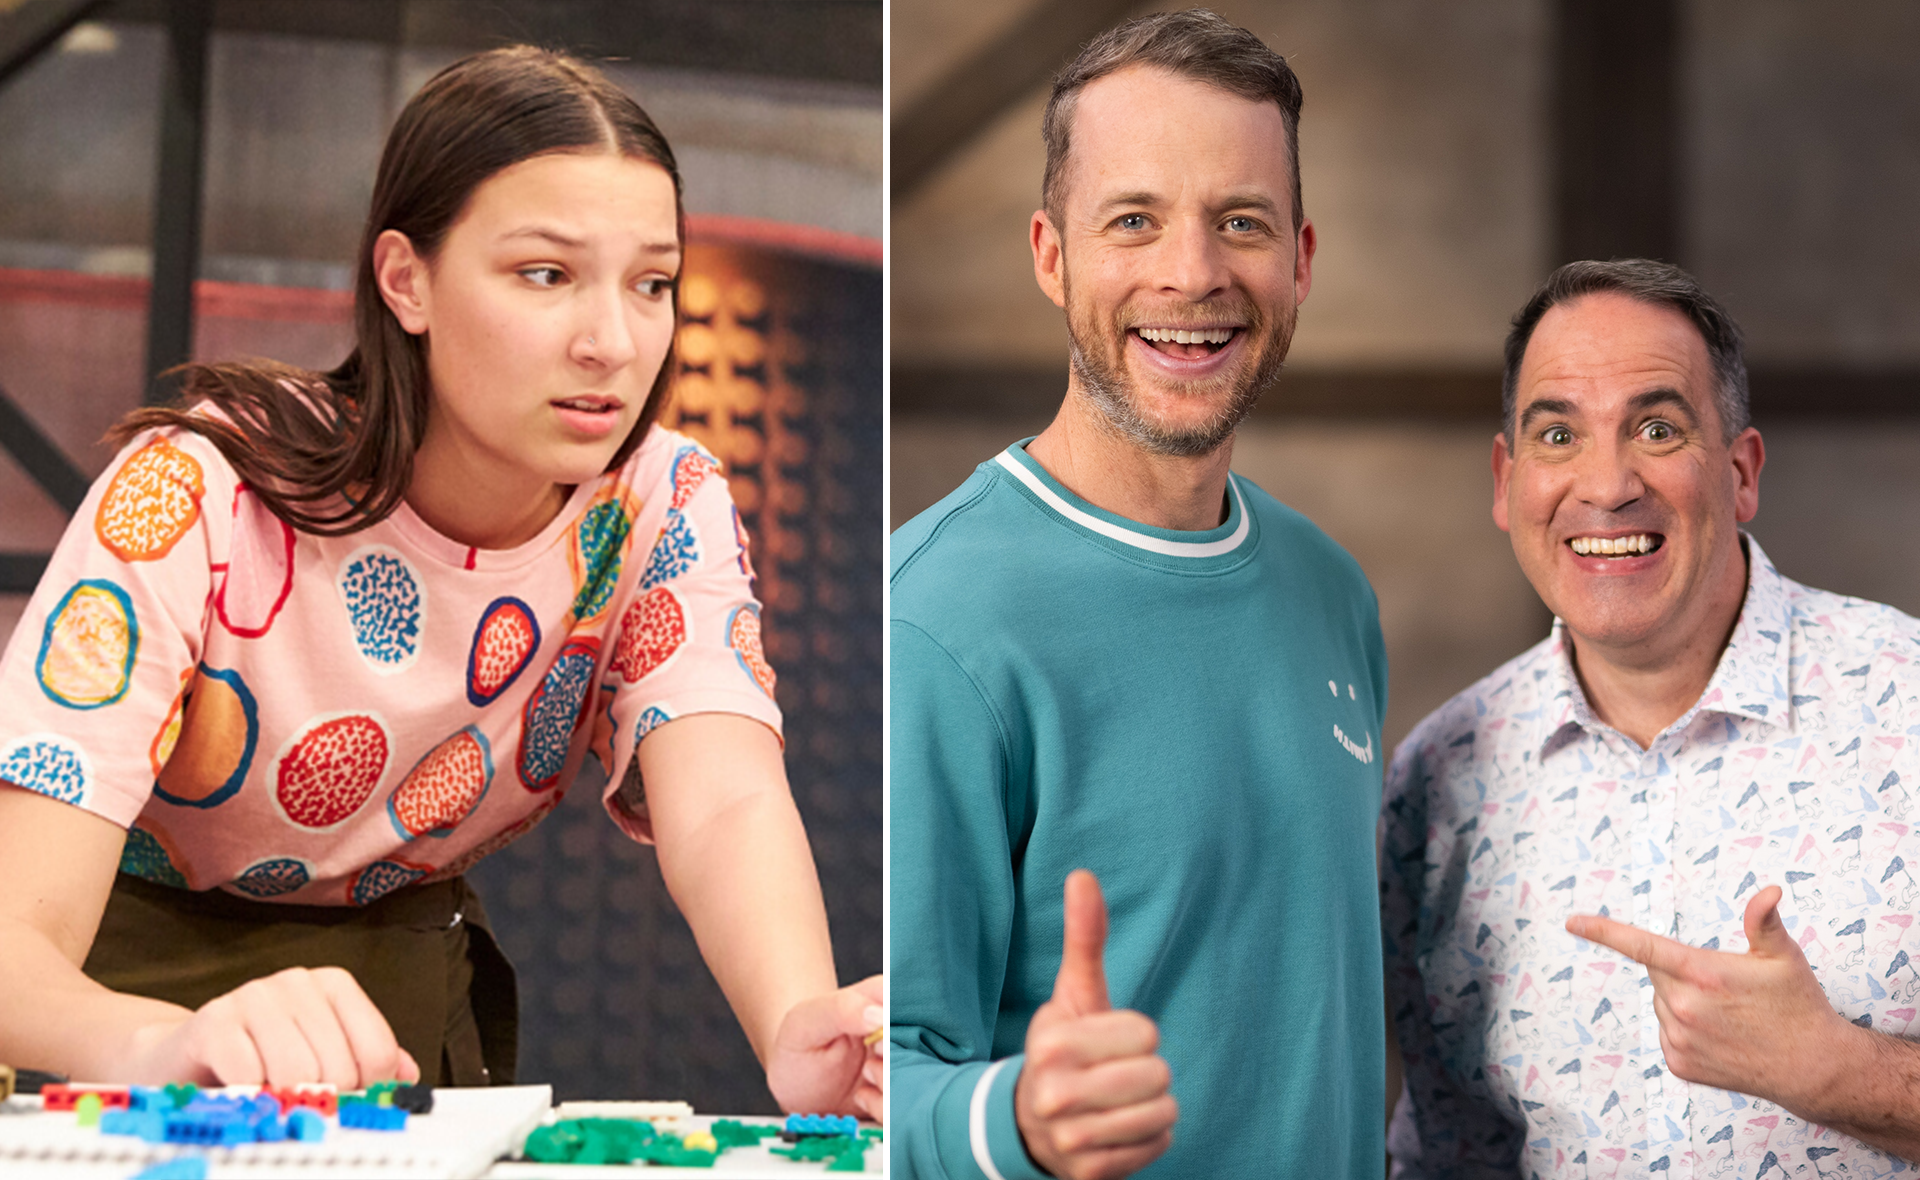 EXCLUSIVE: Lego Masters contestants reveal the show’s behind-the-scenes secrets